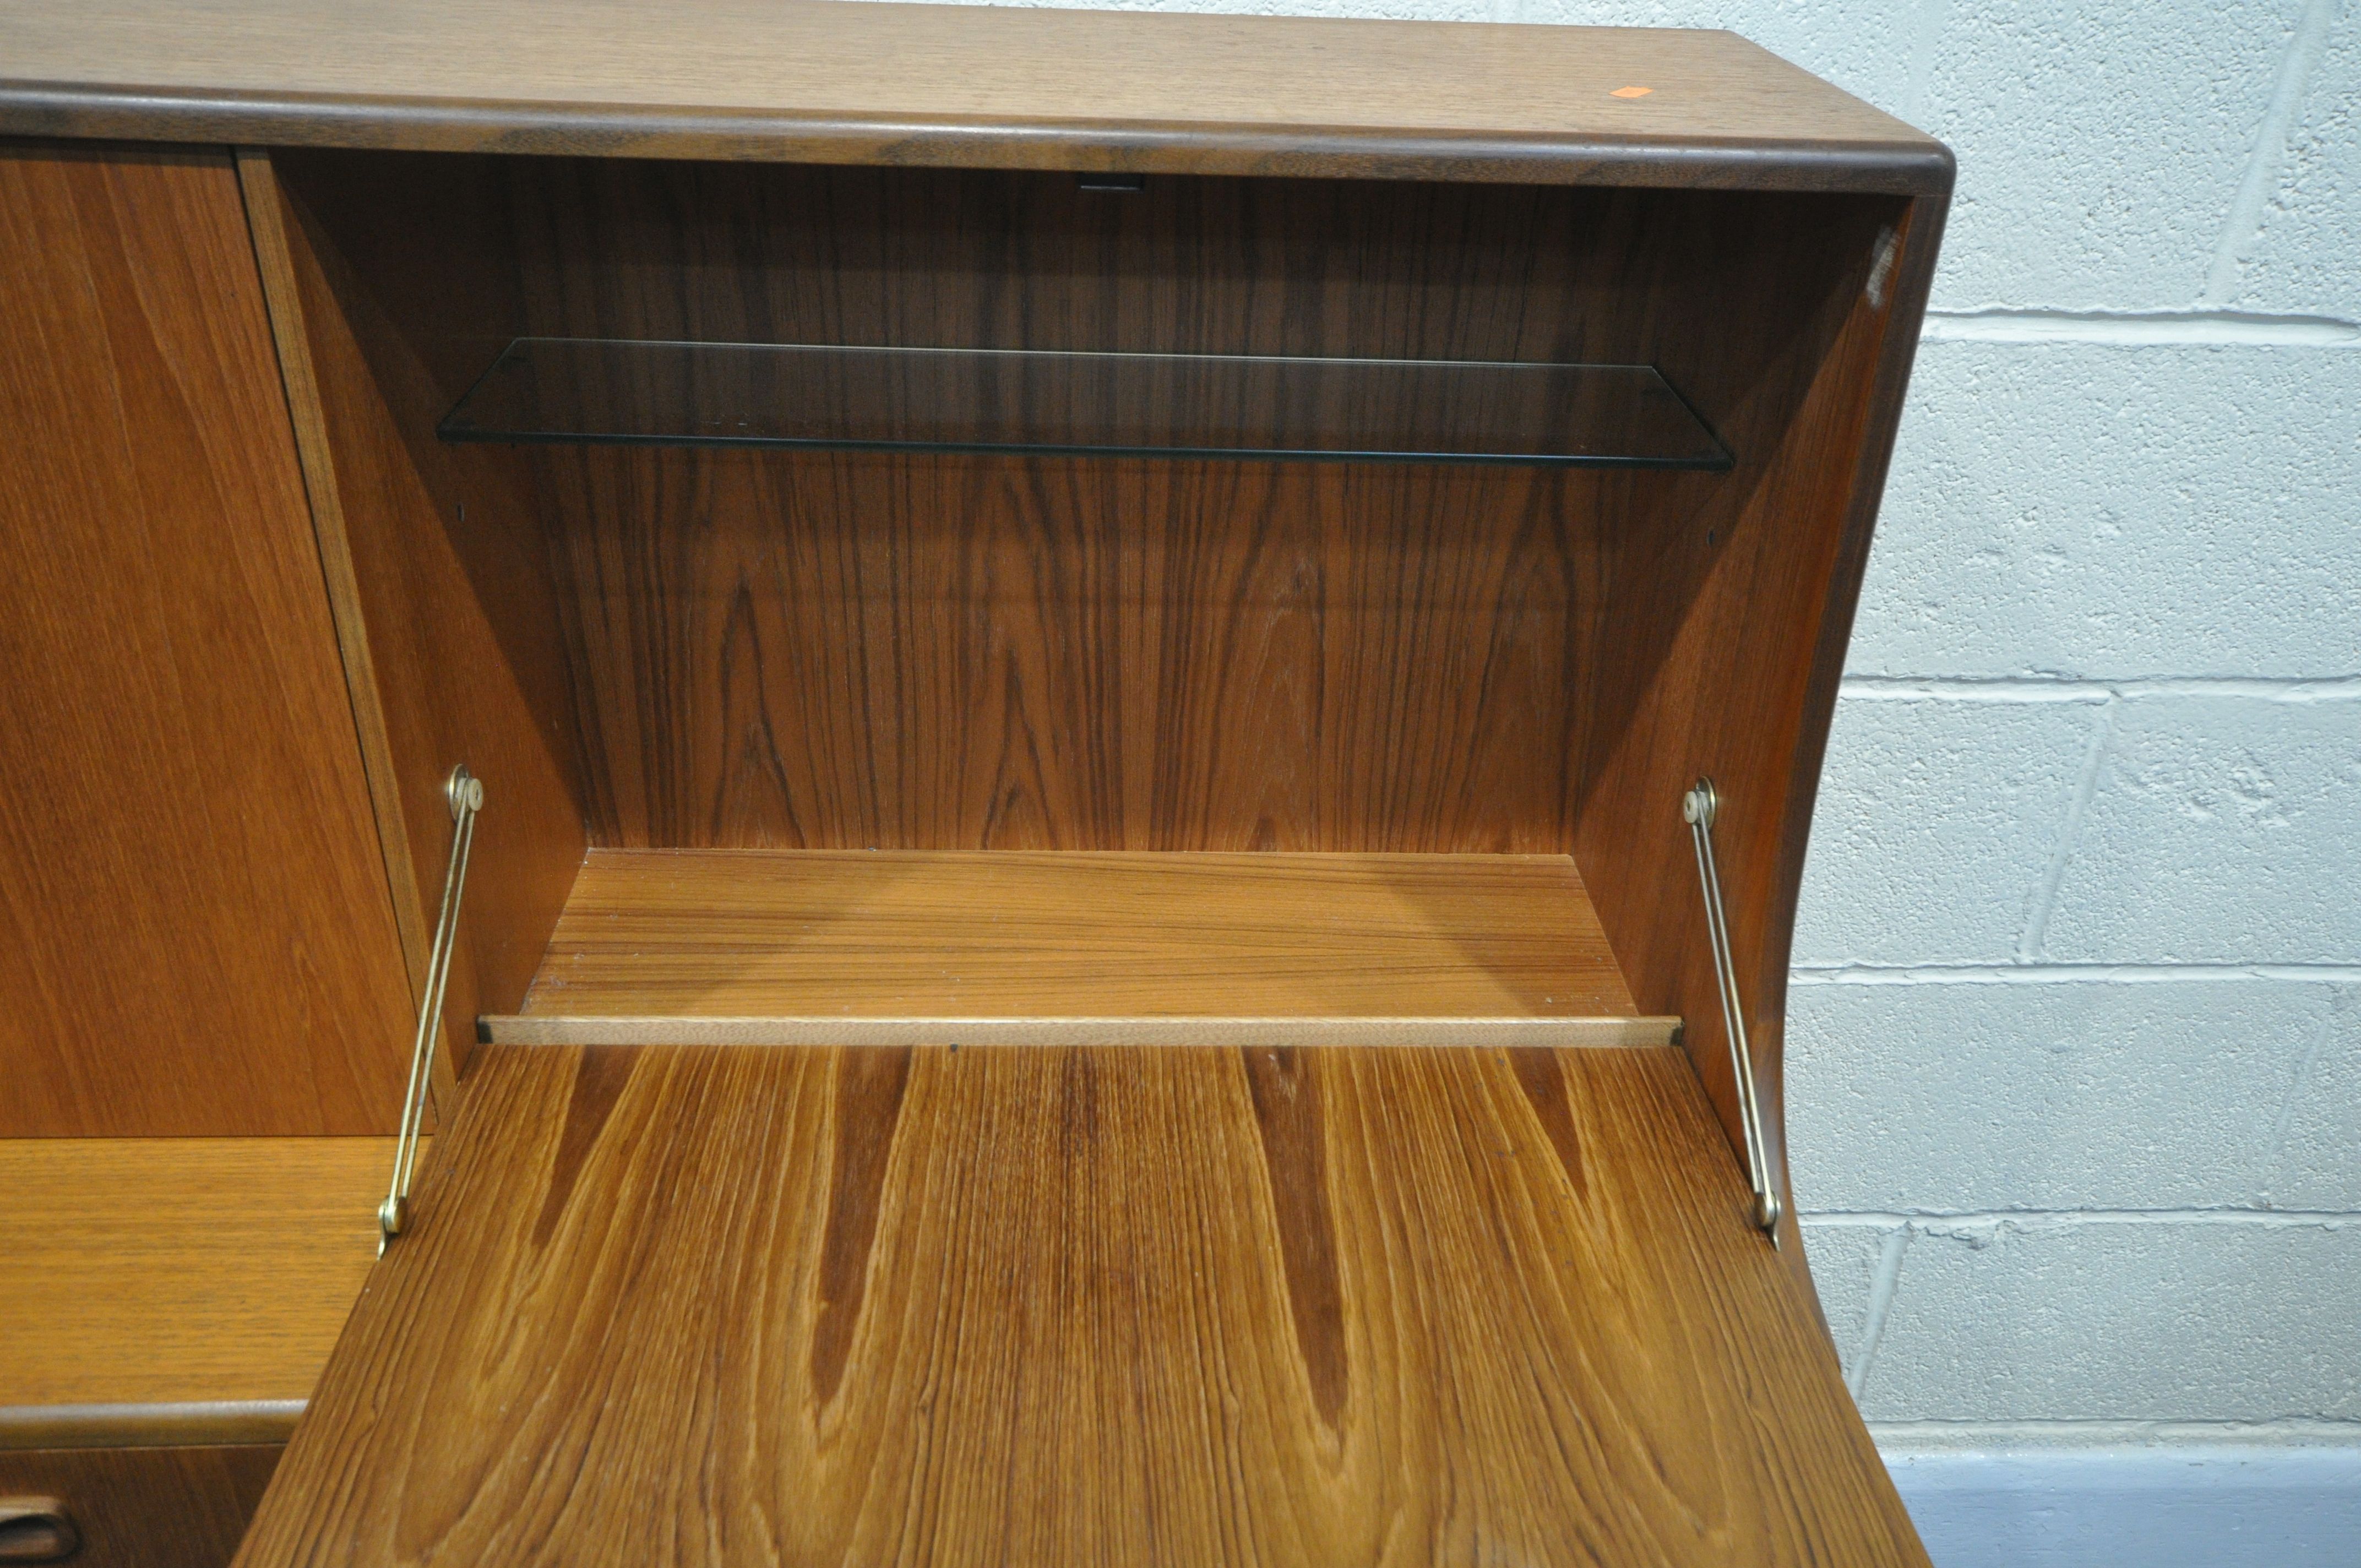 A MID CENTURY G PLAN FRESCO TEAK HIGHBOARD, upper section with a sliding door, and fall front - Image 4 of 7